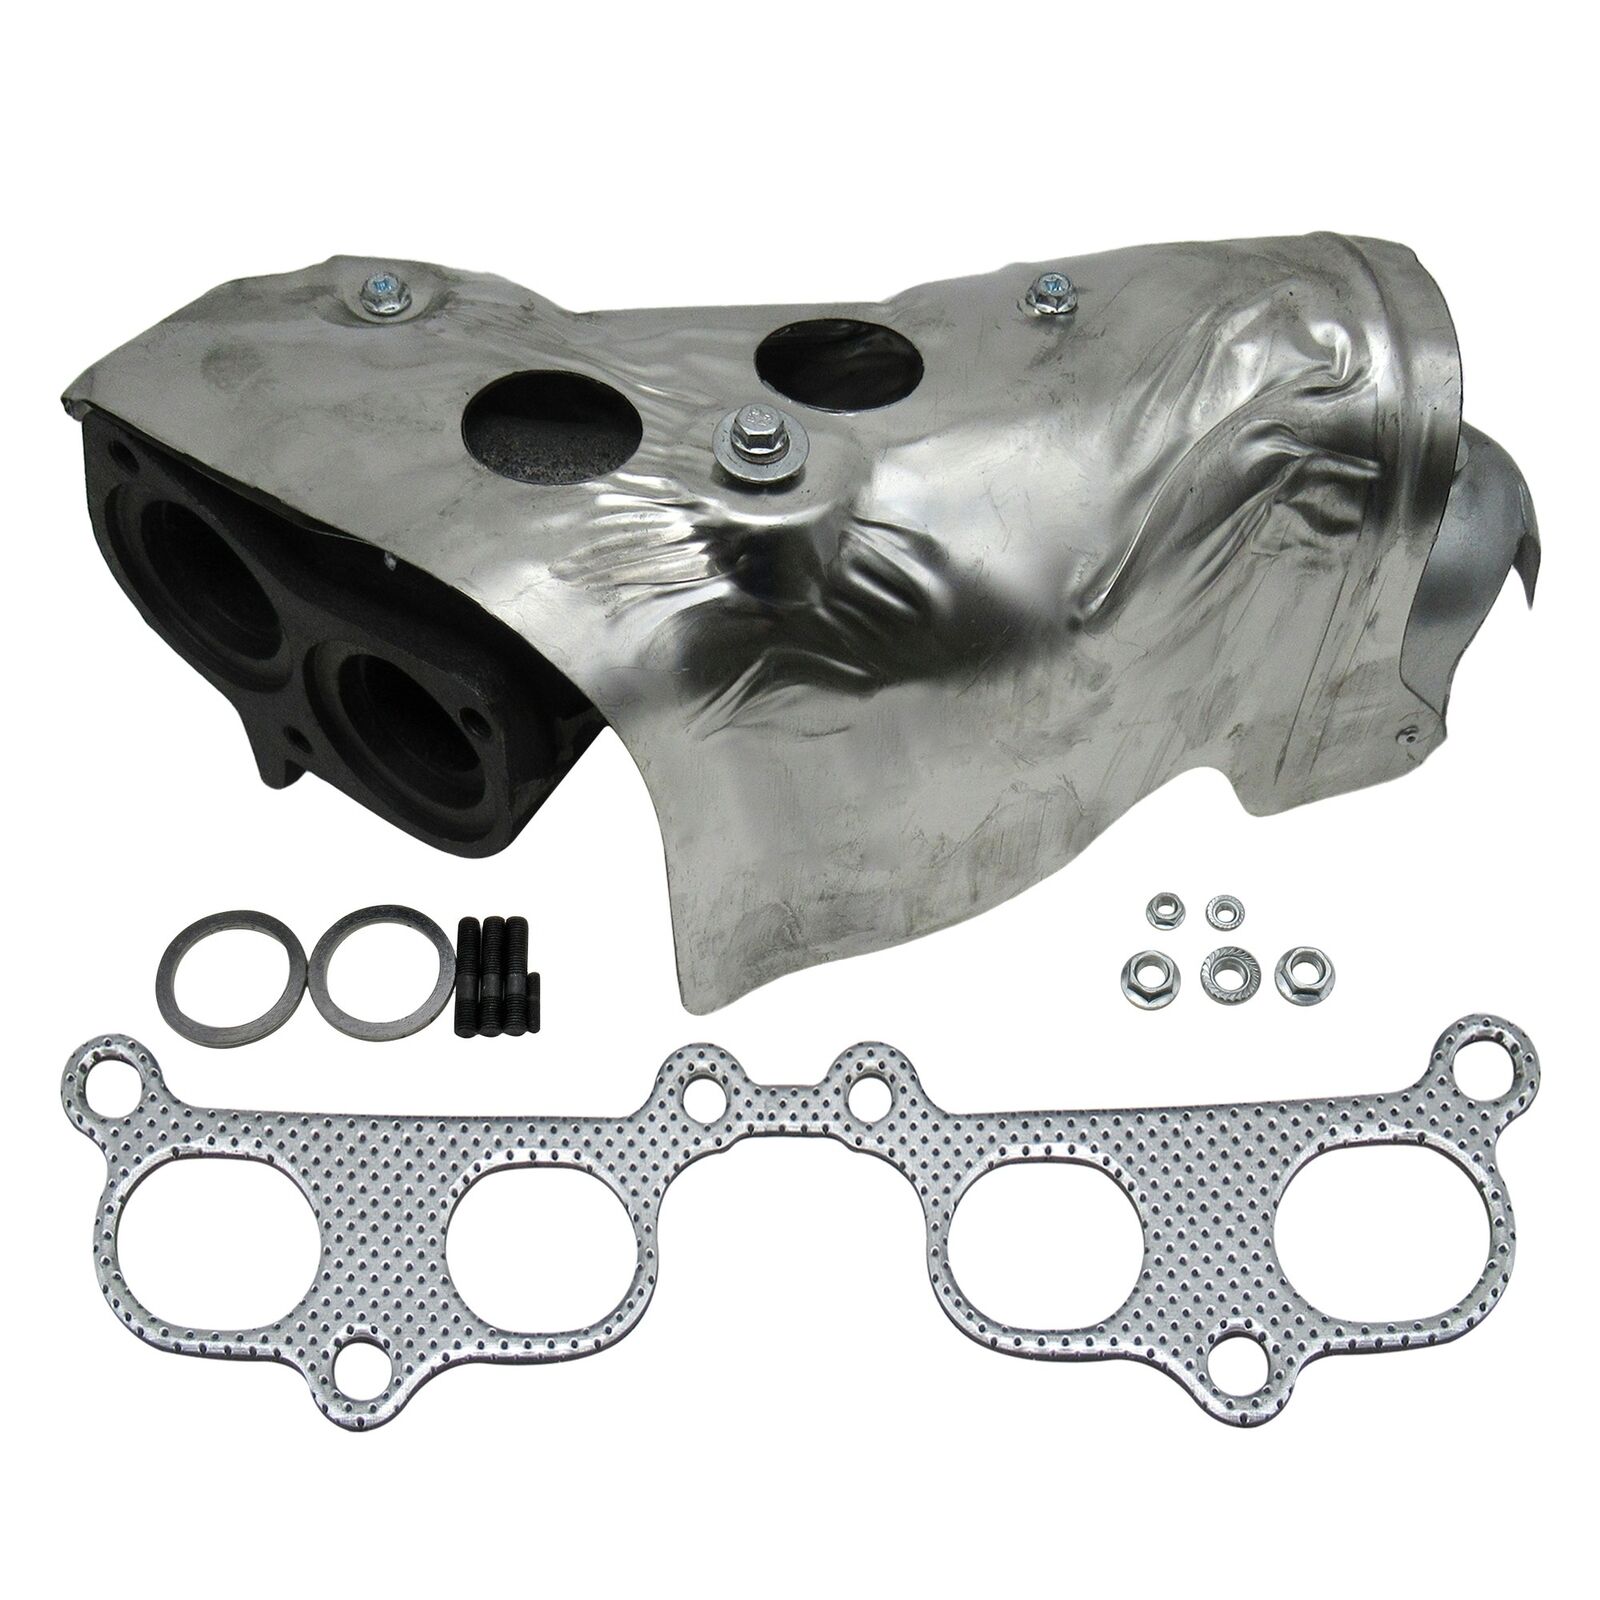 Exhaust Manifold w/ Gasket Kit For 94-2001 Toyota 4Runner Tacoma T100 Truck 2.4L